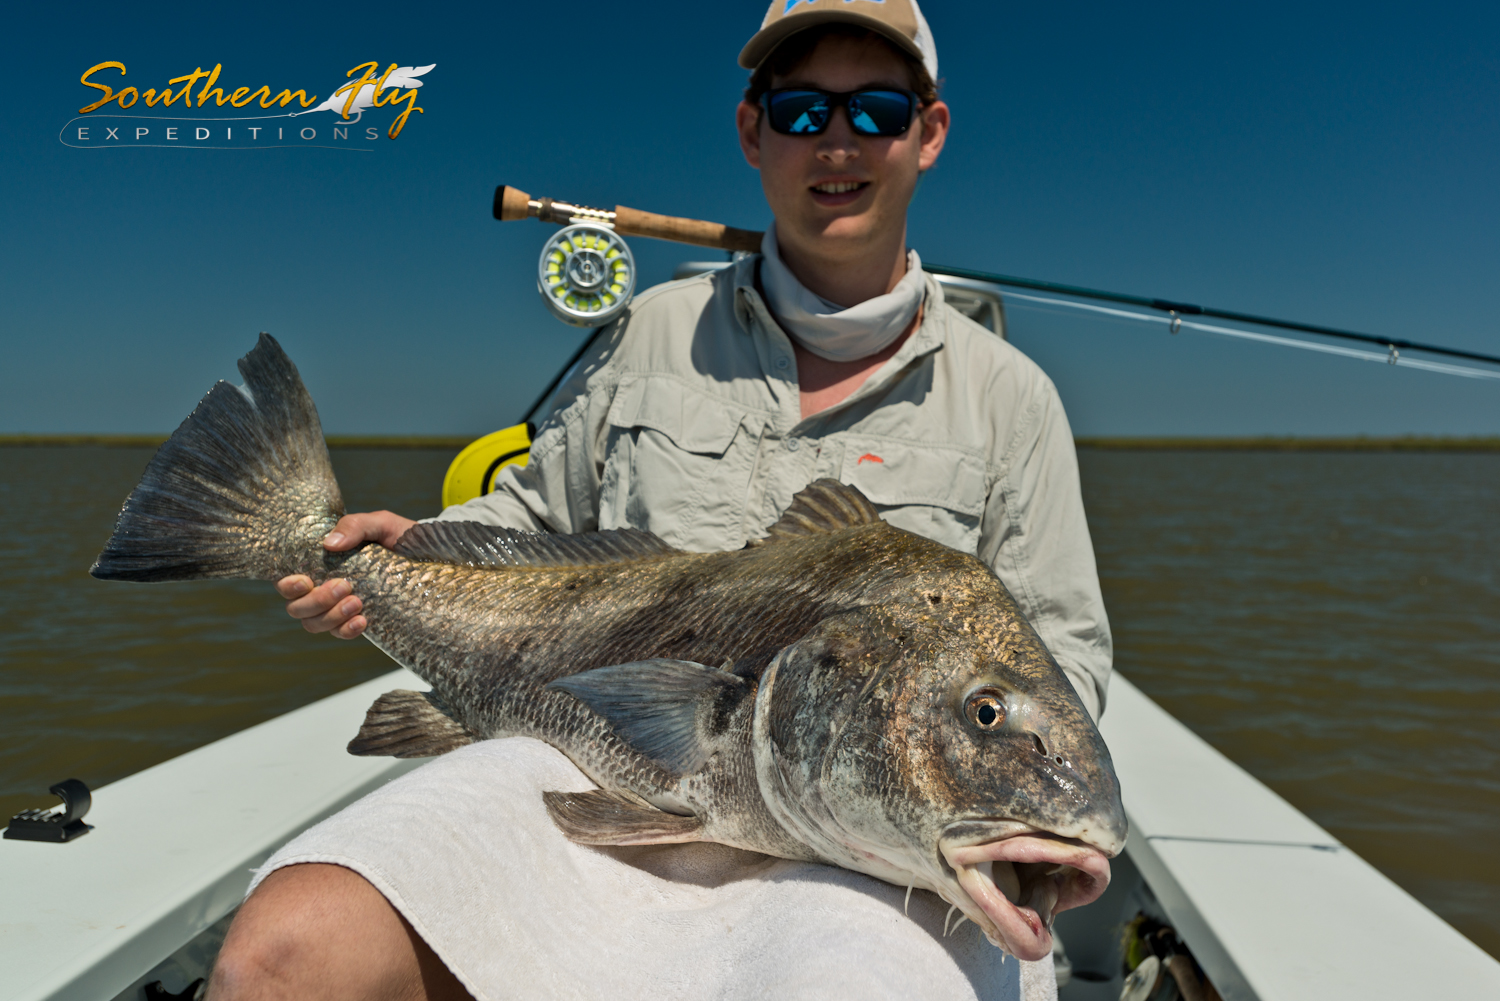 Southern-Fly-Expeditions-New-Orleans-Louisiana-Fly-Fishing-Redfish-1.jpg